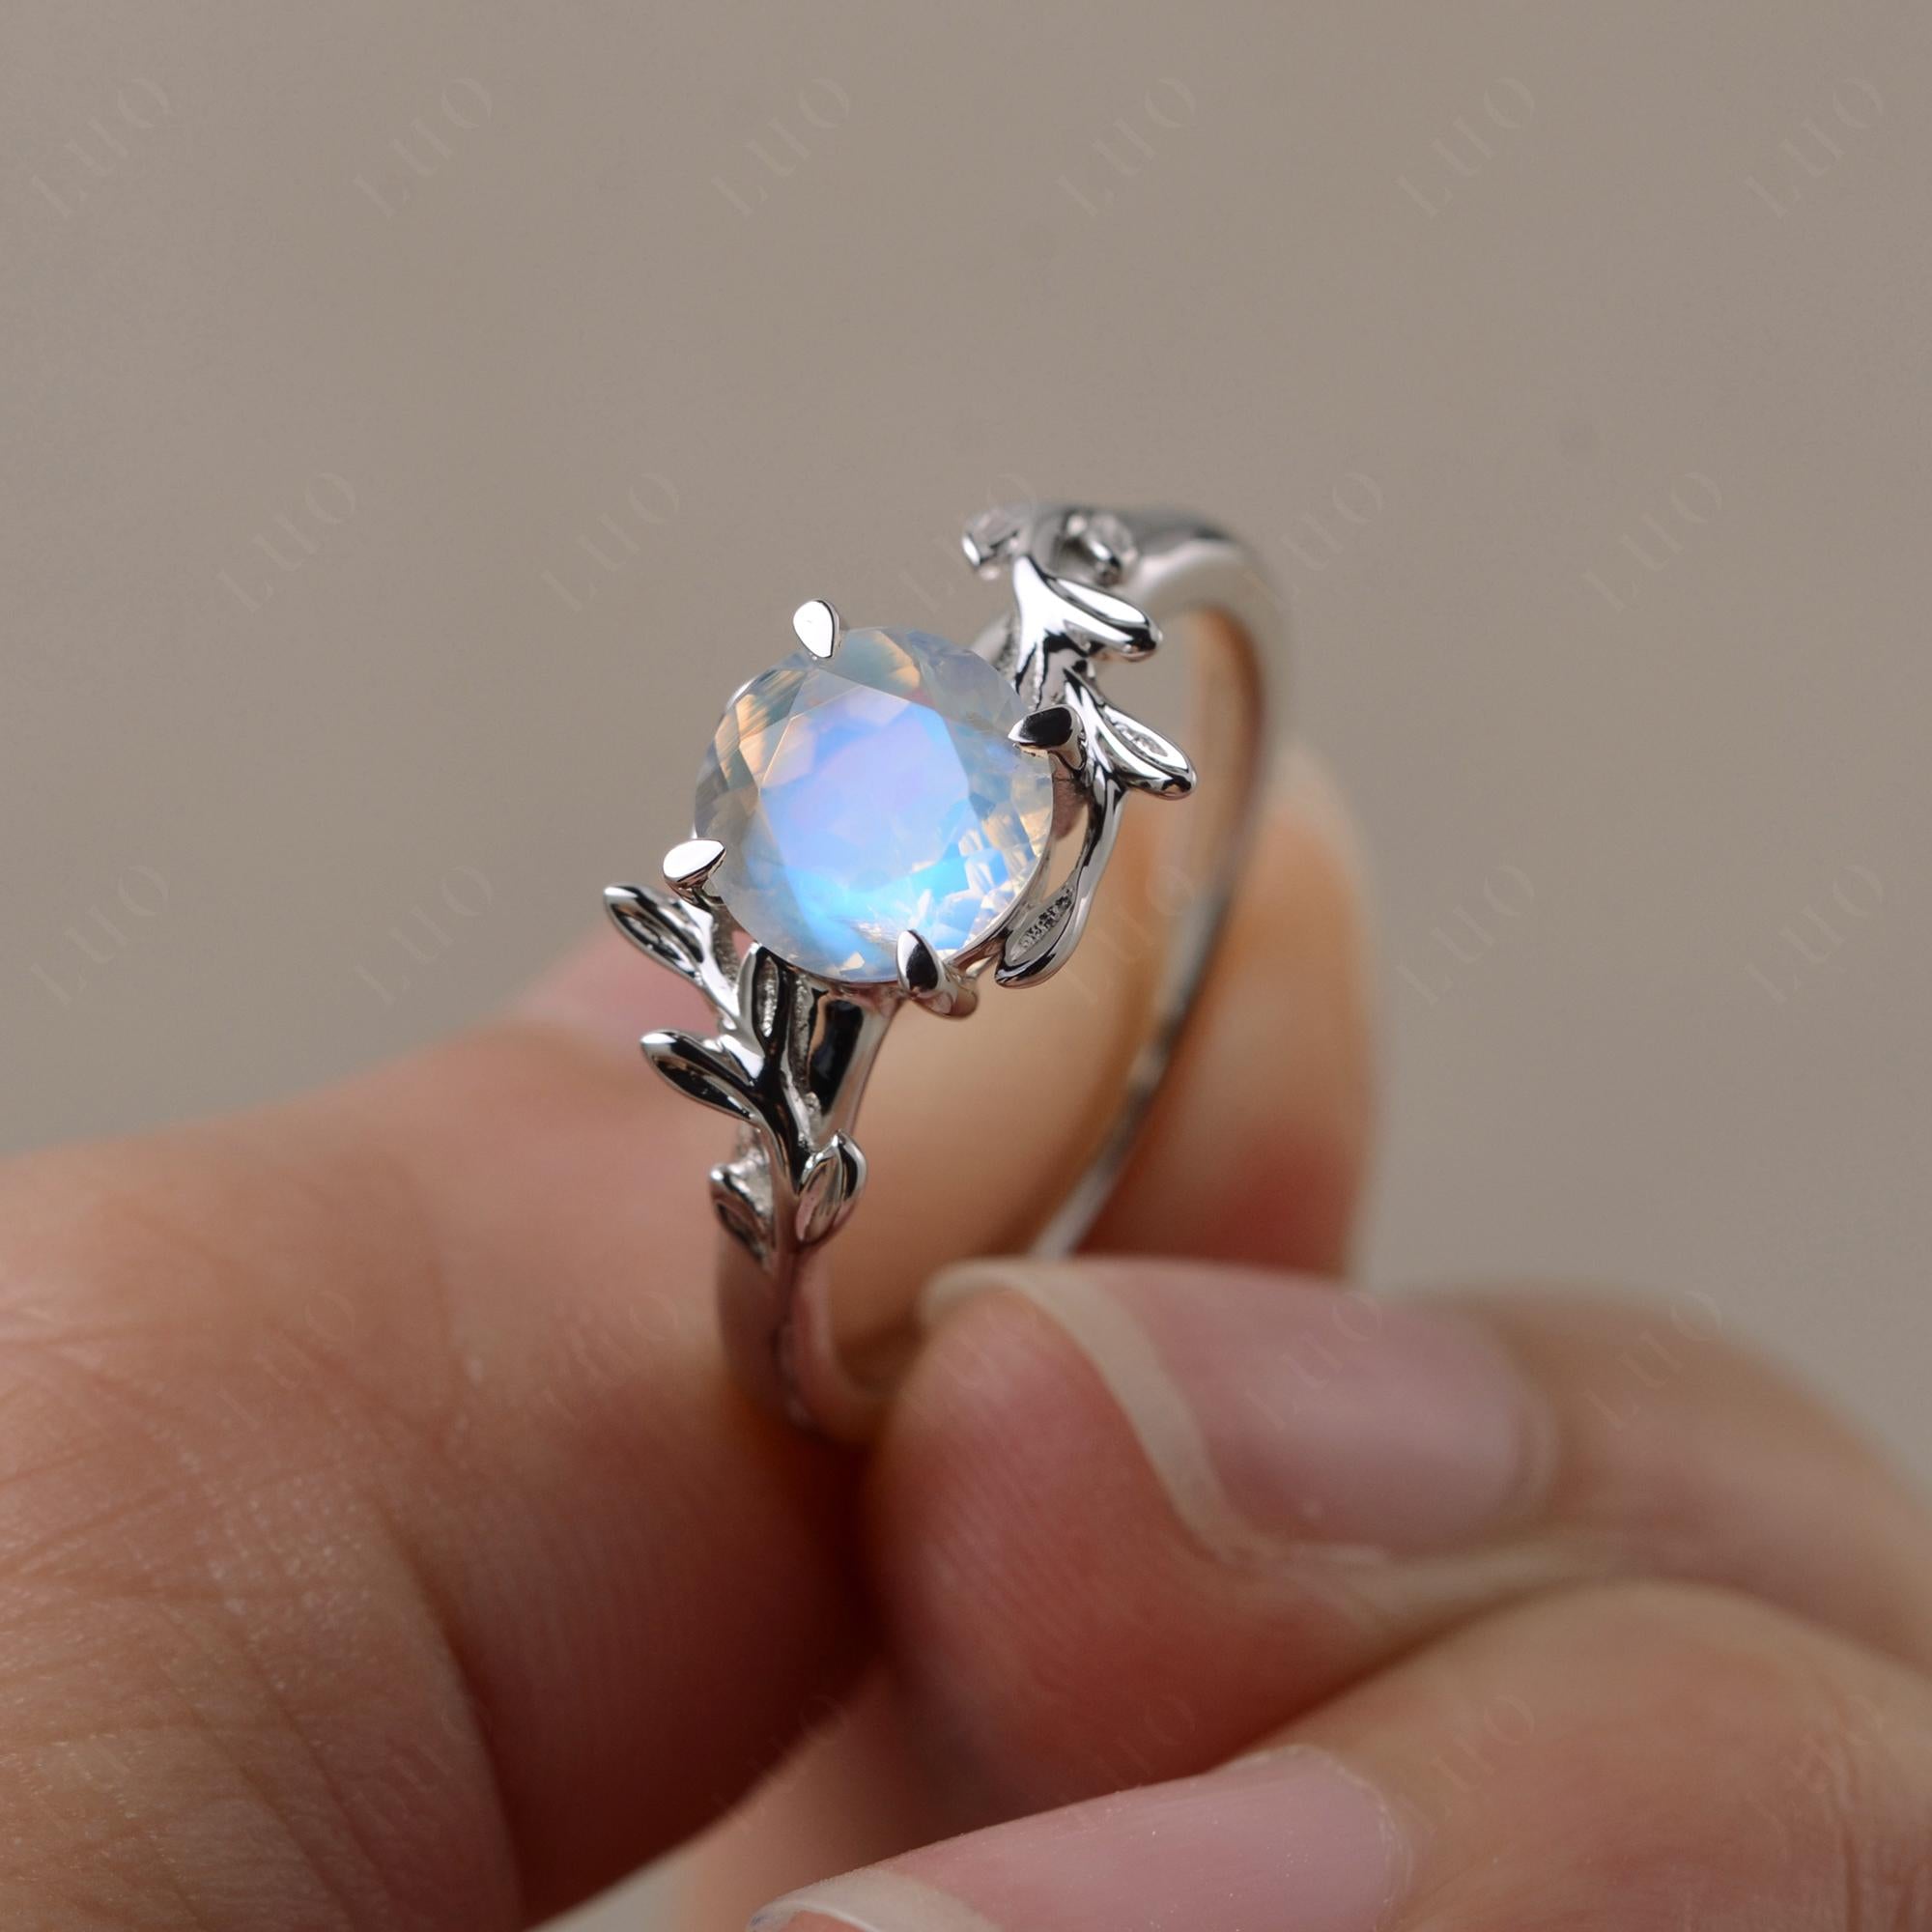 Vine Moonstone Solitaire Engagement Ring - LUO Jewelry